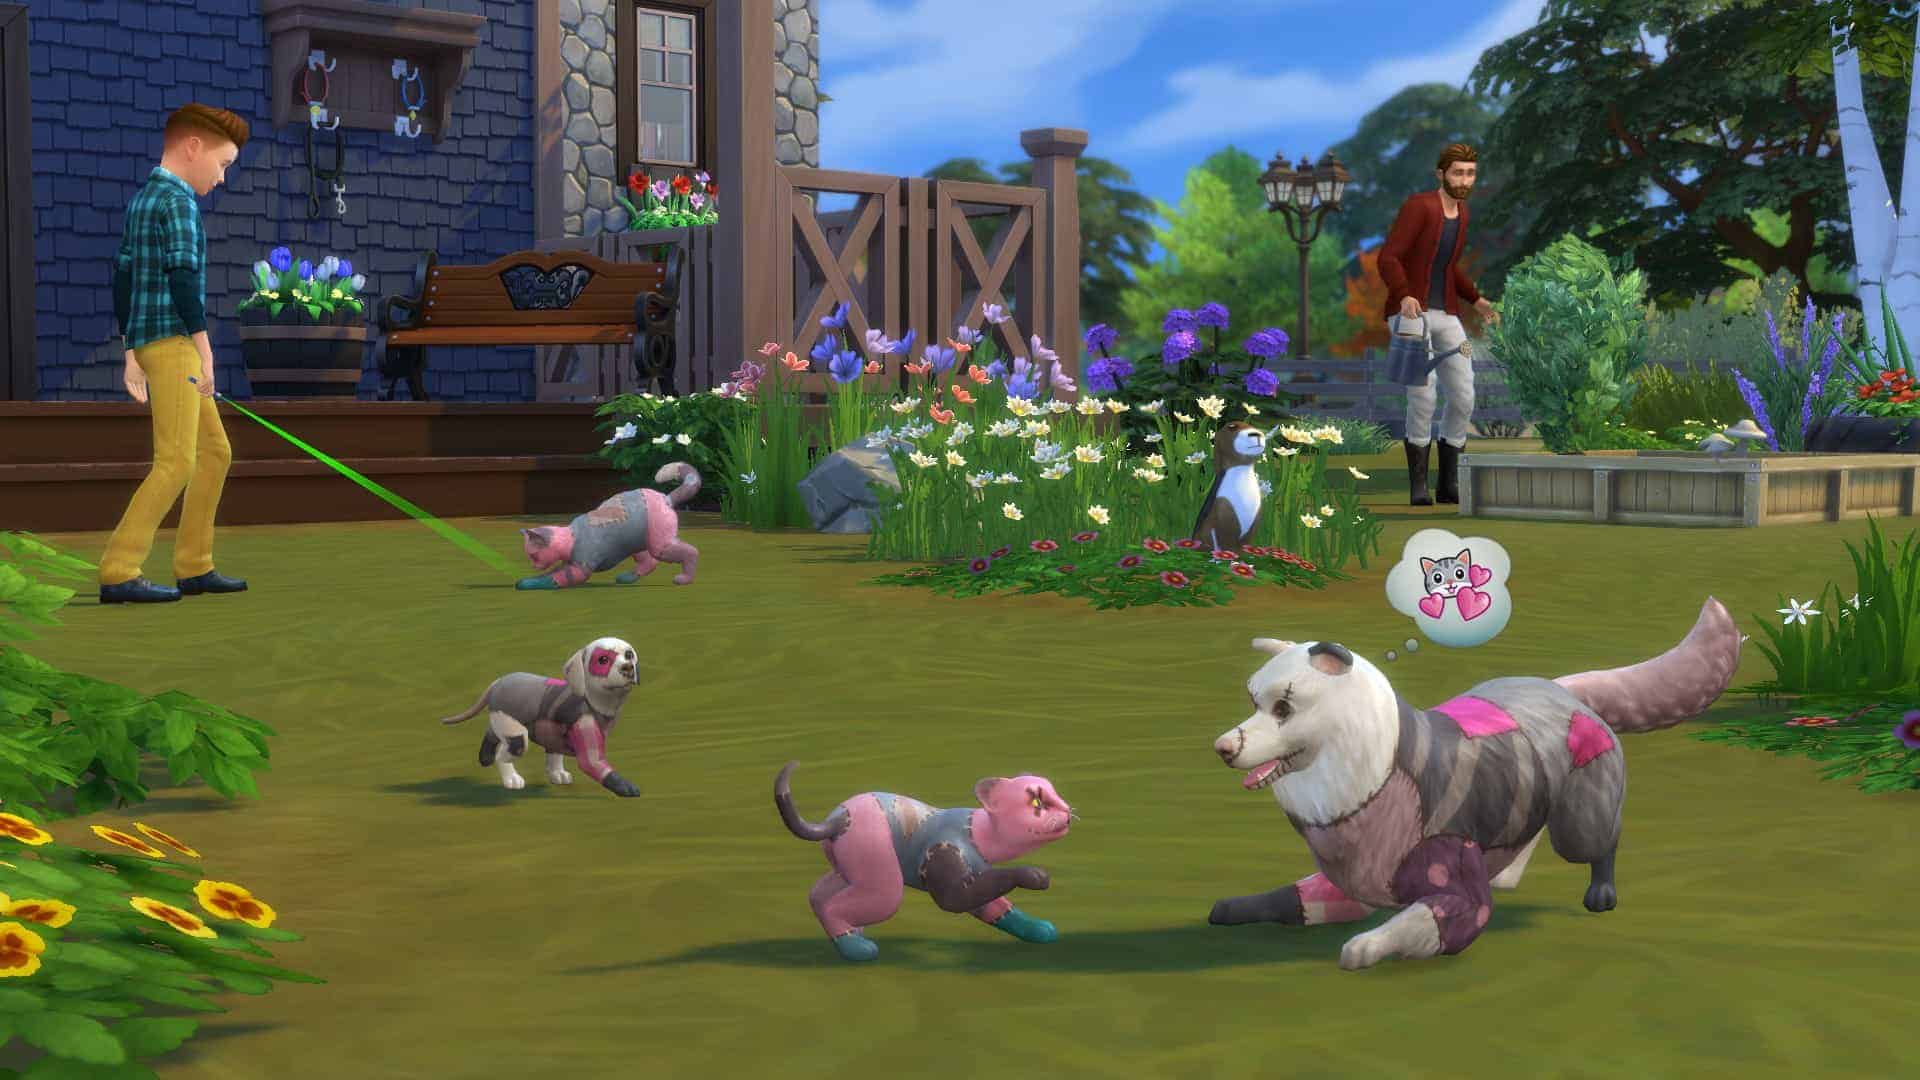 Sims 4 cats and dogs download pc